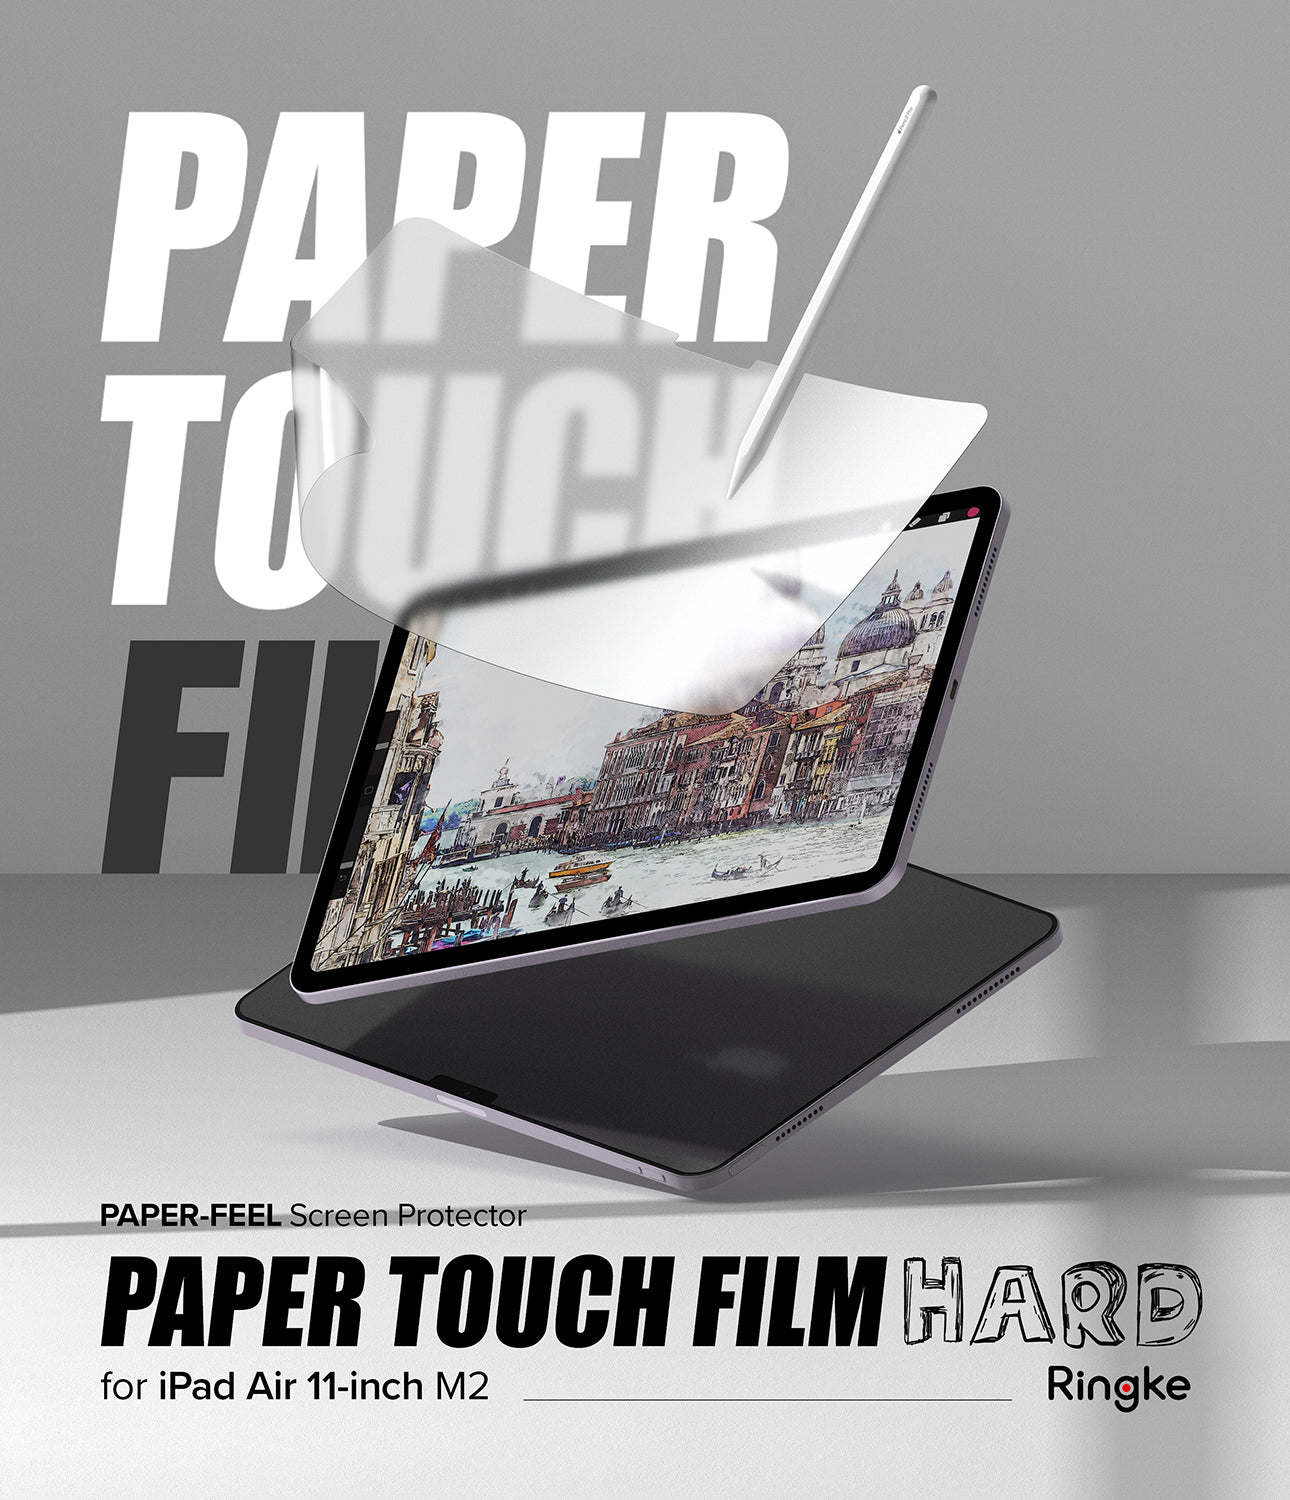 iPad Air 11" (M2) Screen Protector | Paper Touch Film - Hard - By Ringke